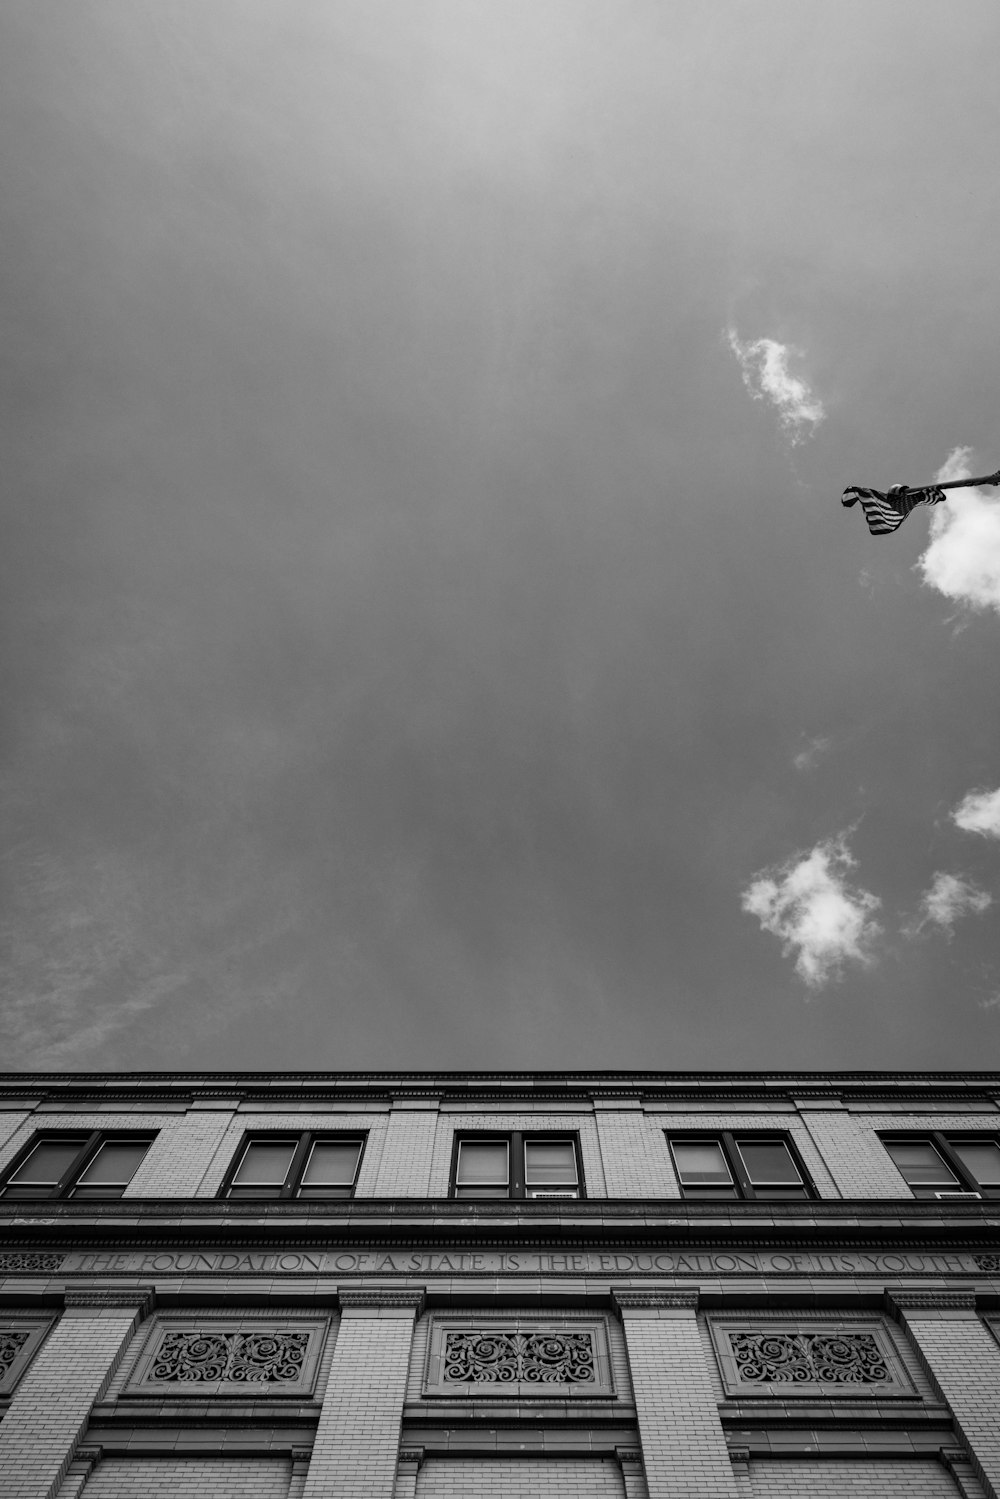 a helicopter flying over a building